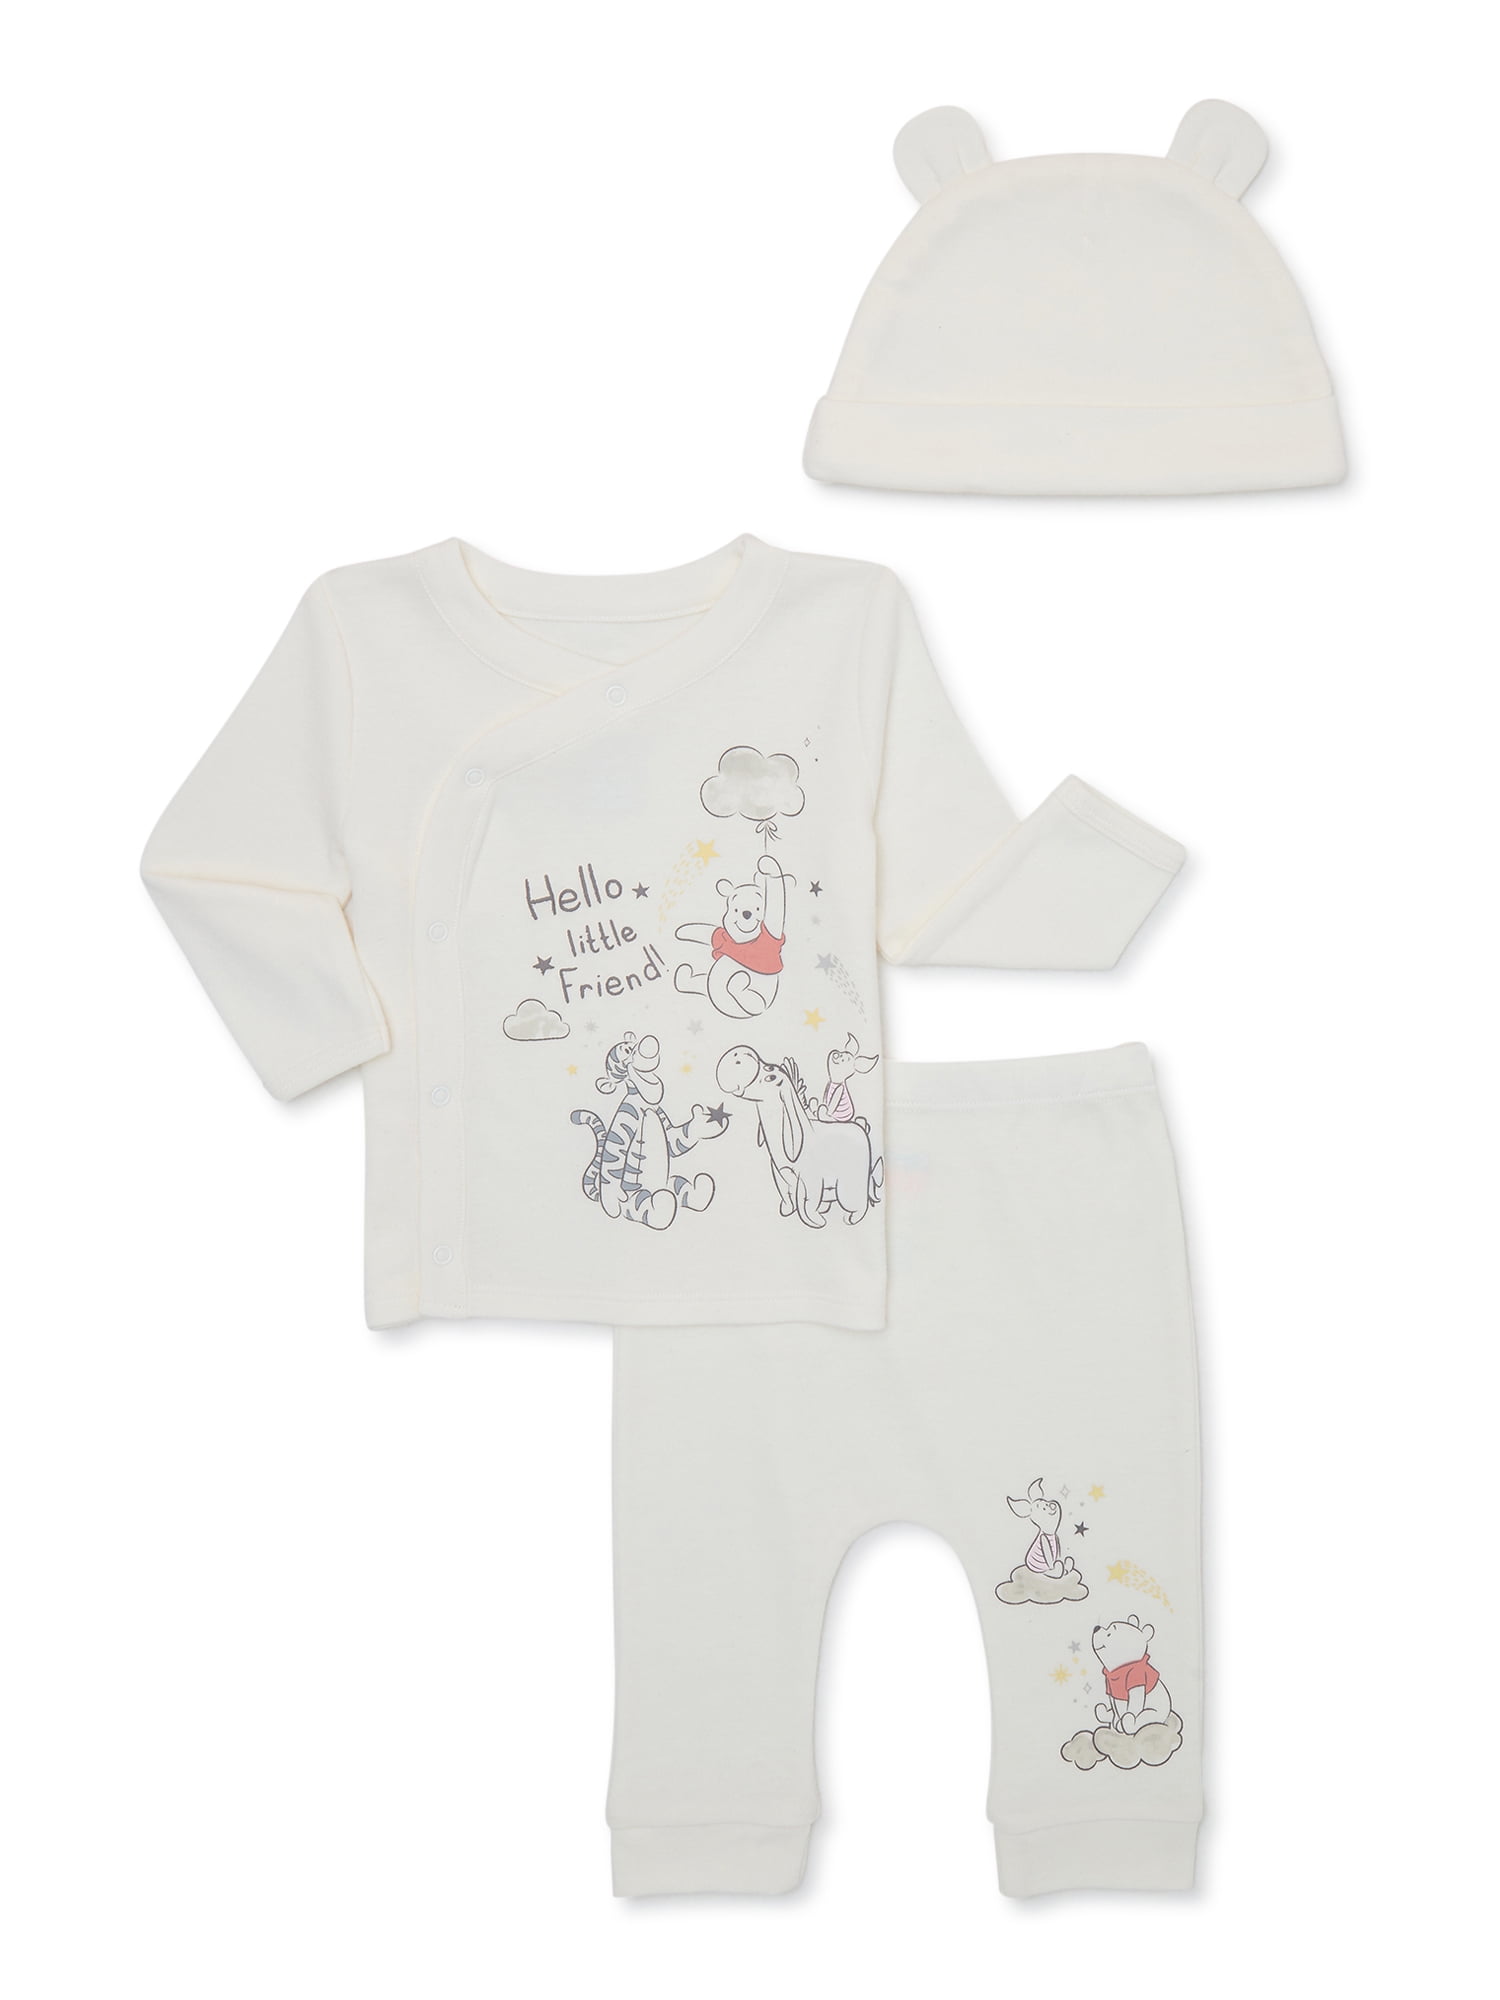 Disney Baby Wishes + Dreams Winnie The Pooh Baby Boys and Girls Unisex Take Me Home Set, Sizes 0-12 Months